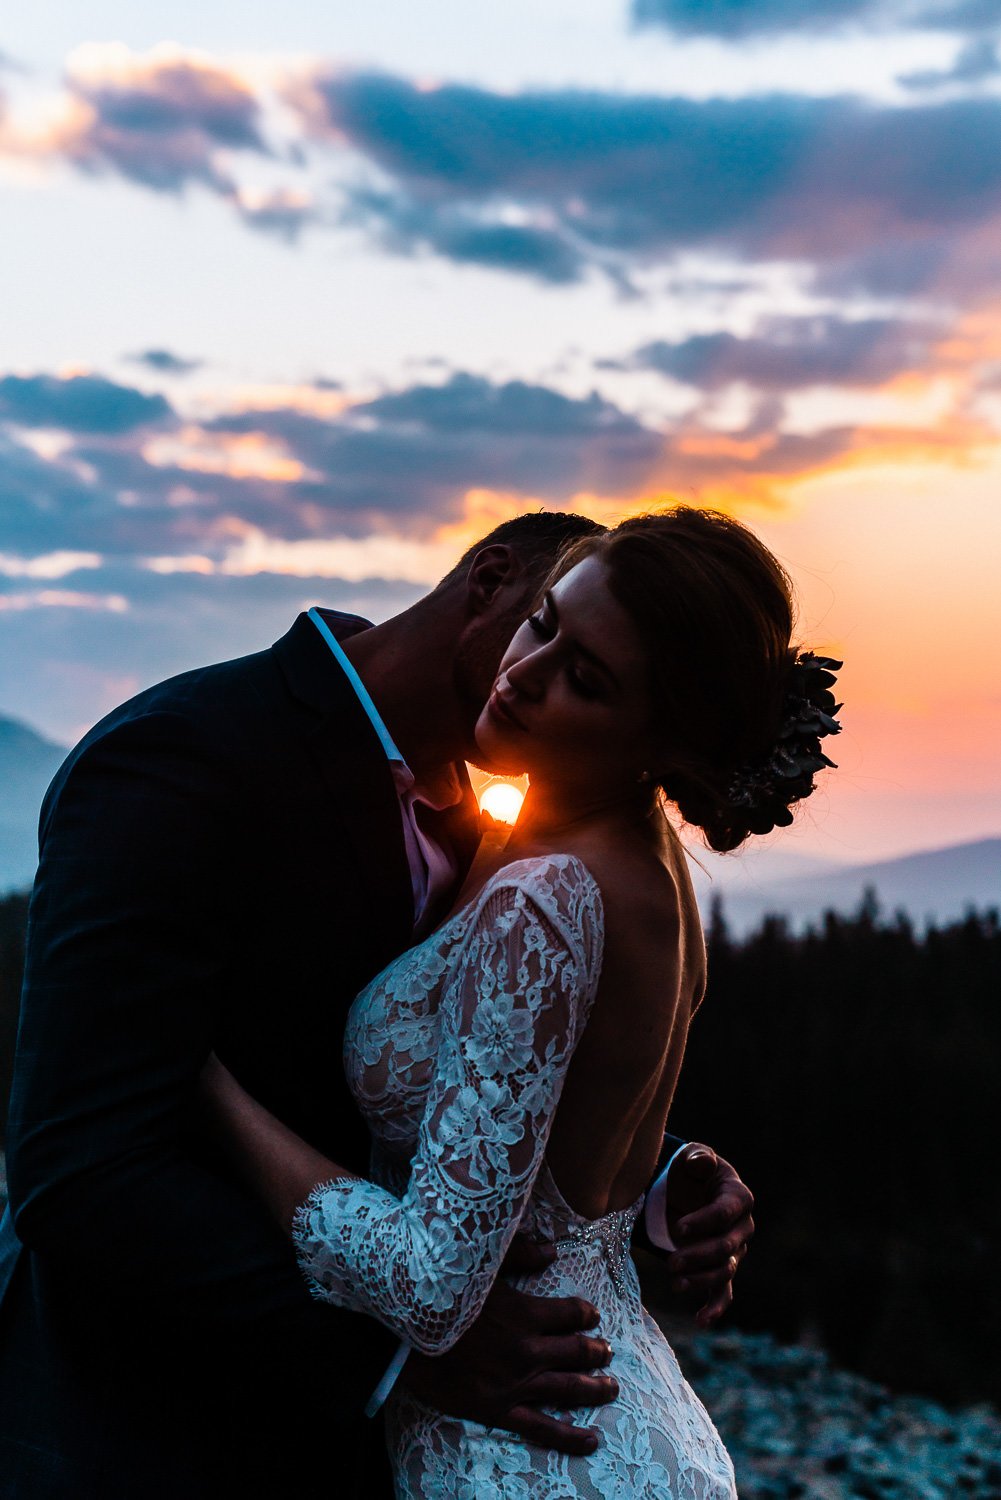 An intimate elopement photoshoot captures a bride and groom embracing at sunset in the mountains.